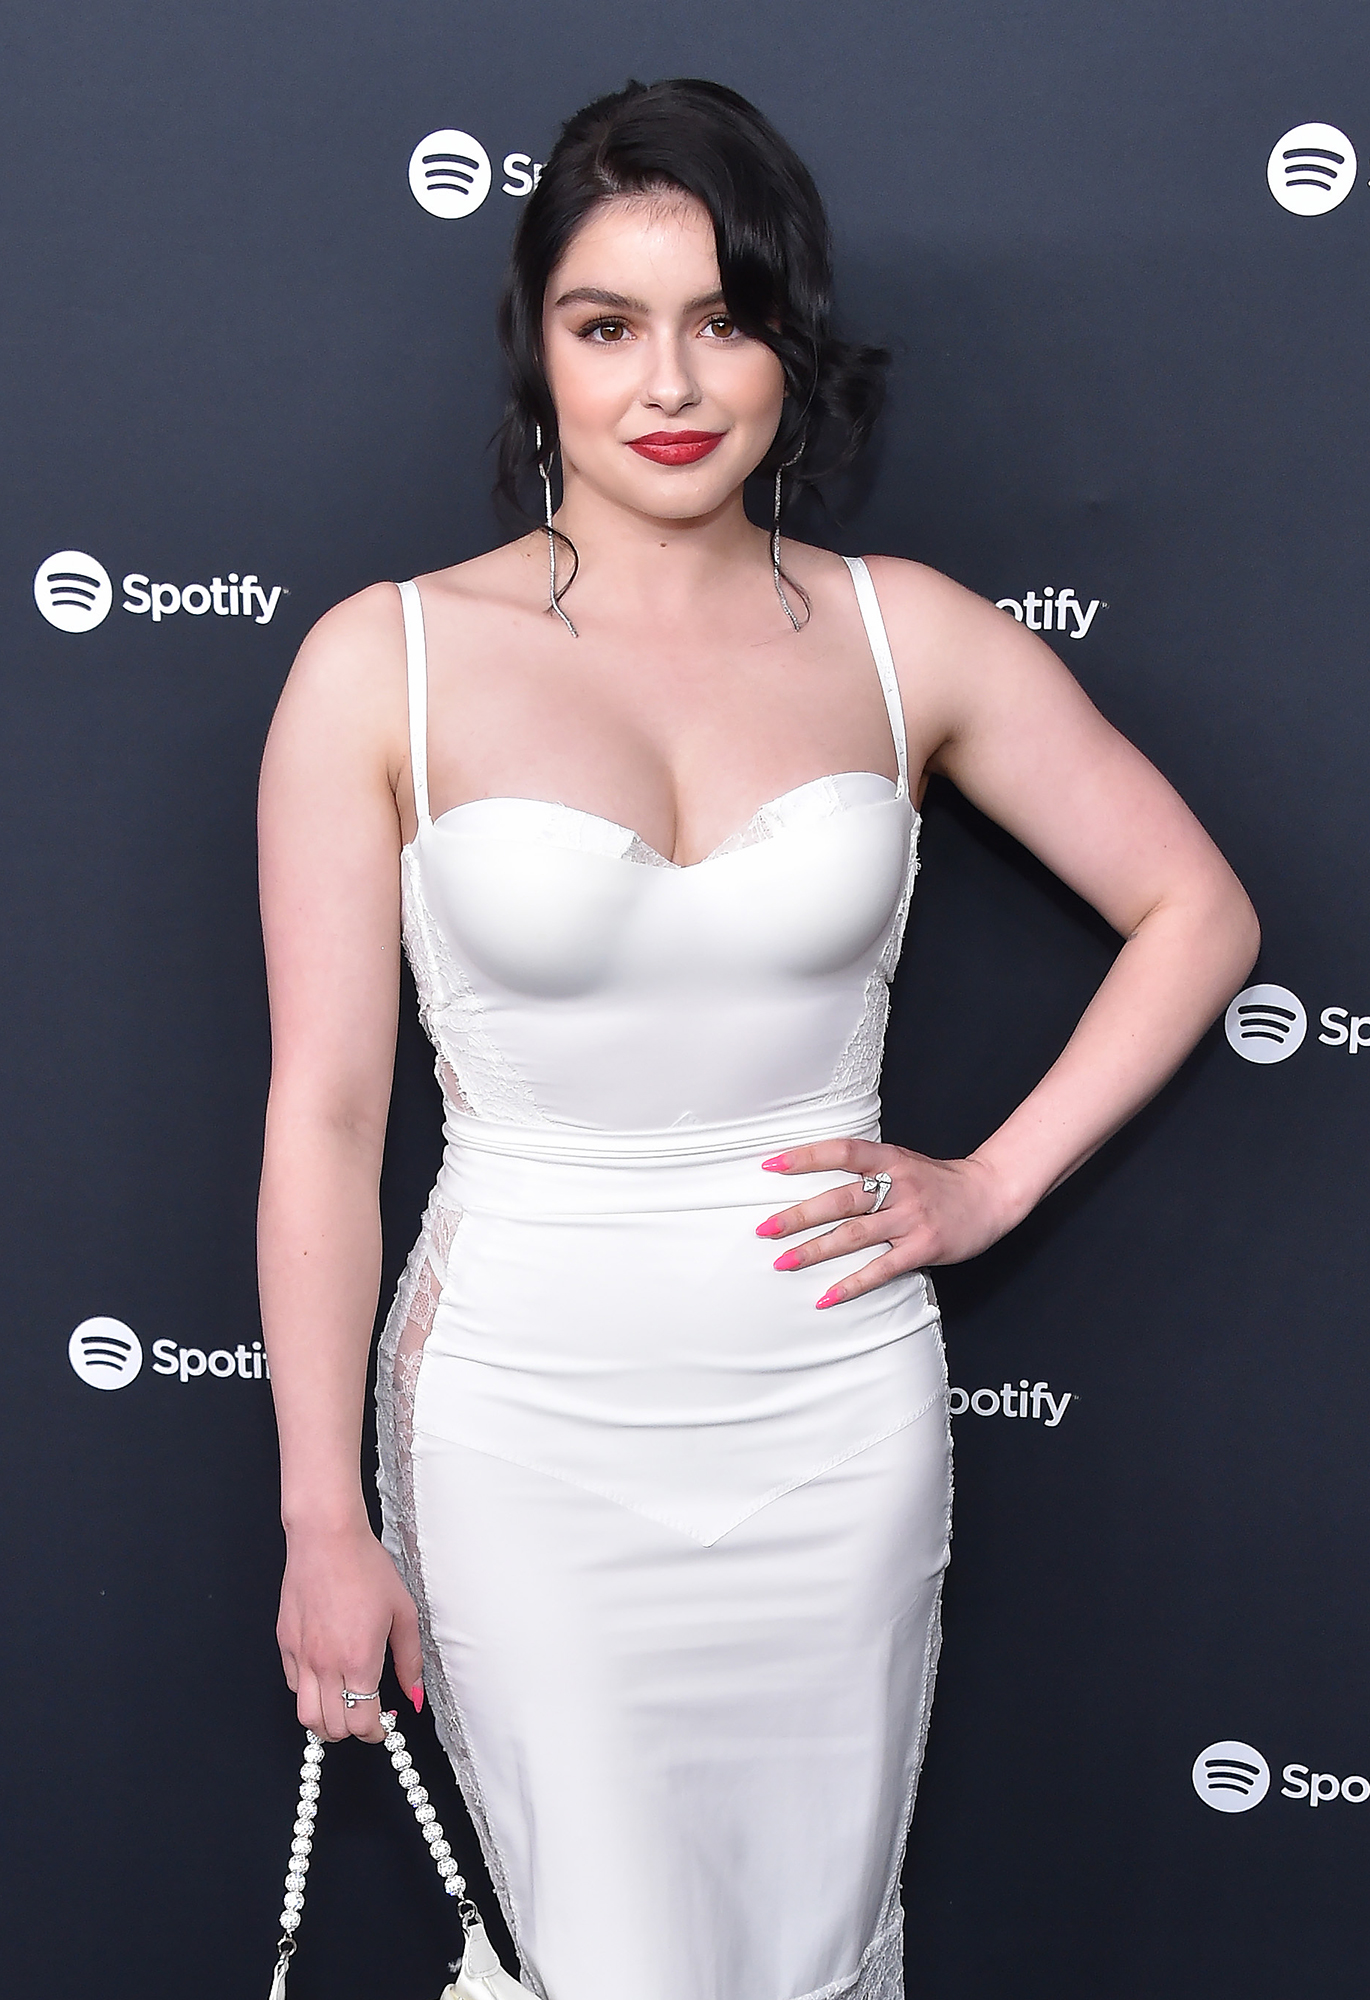 https://www.usmagazine.com/wp-content/uploads/2022/01/Ariel-Winter-Through-the-Years-Features.jpg?quality=82&strip=all